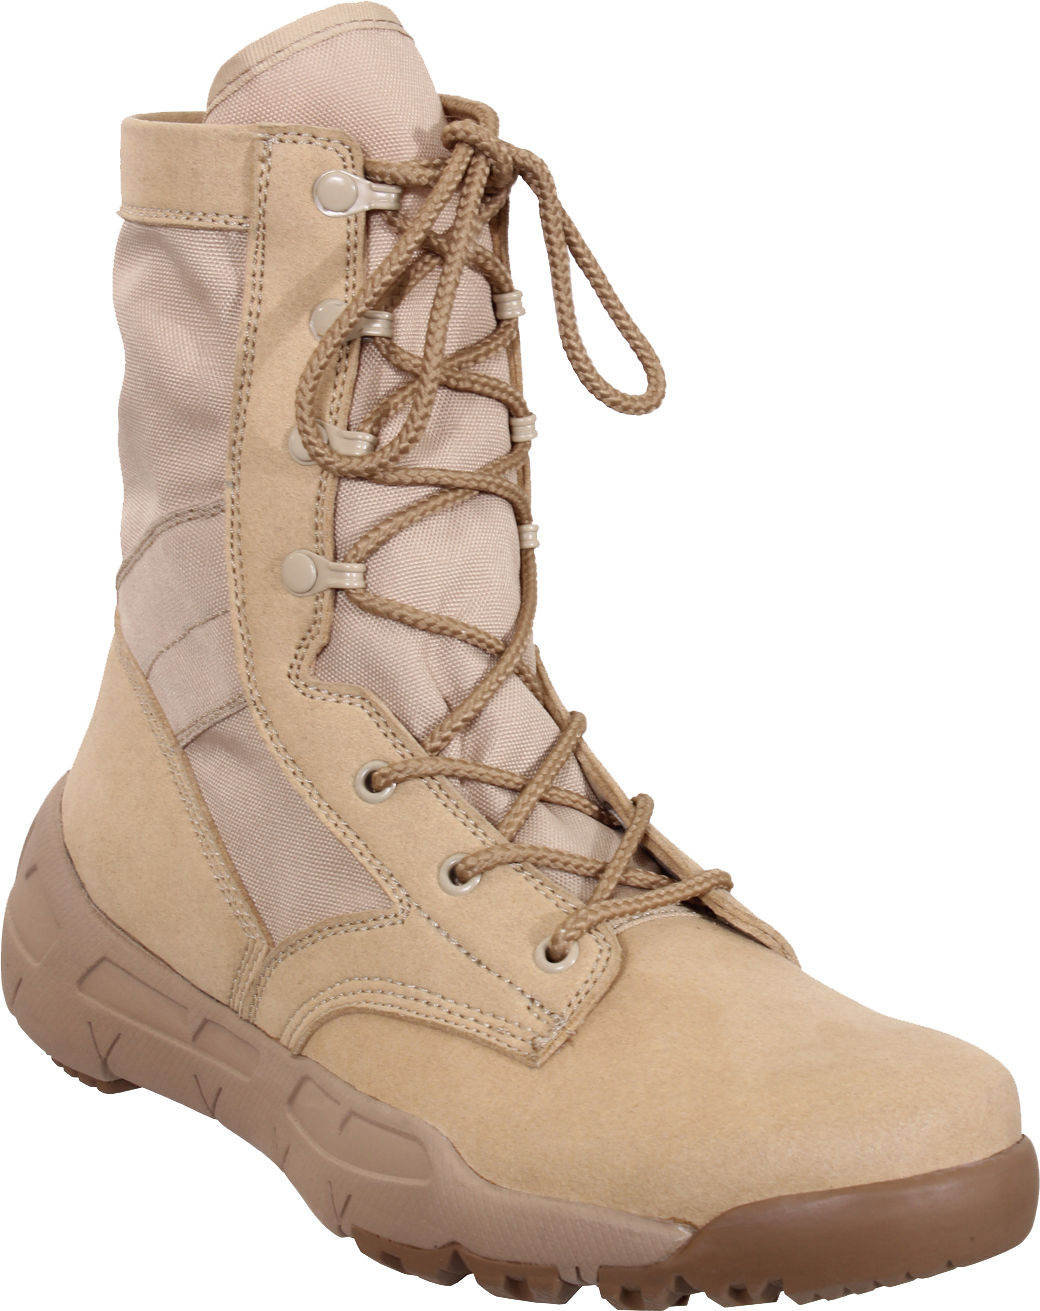 Rothco Desert Tan V-Max Lightweight Tactical Boots